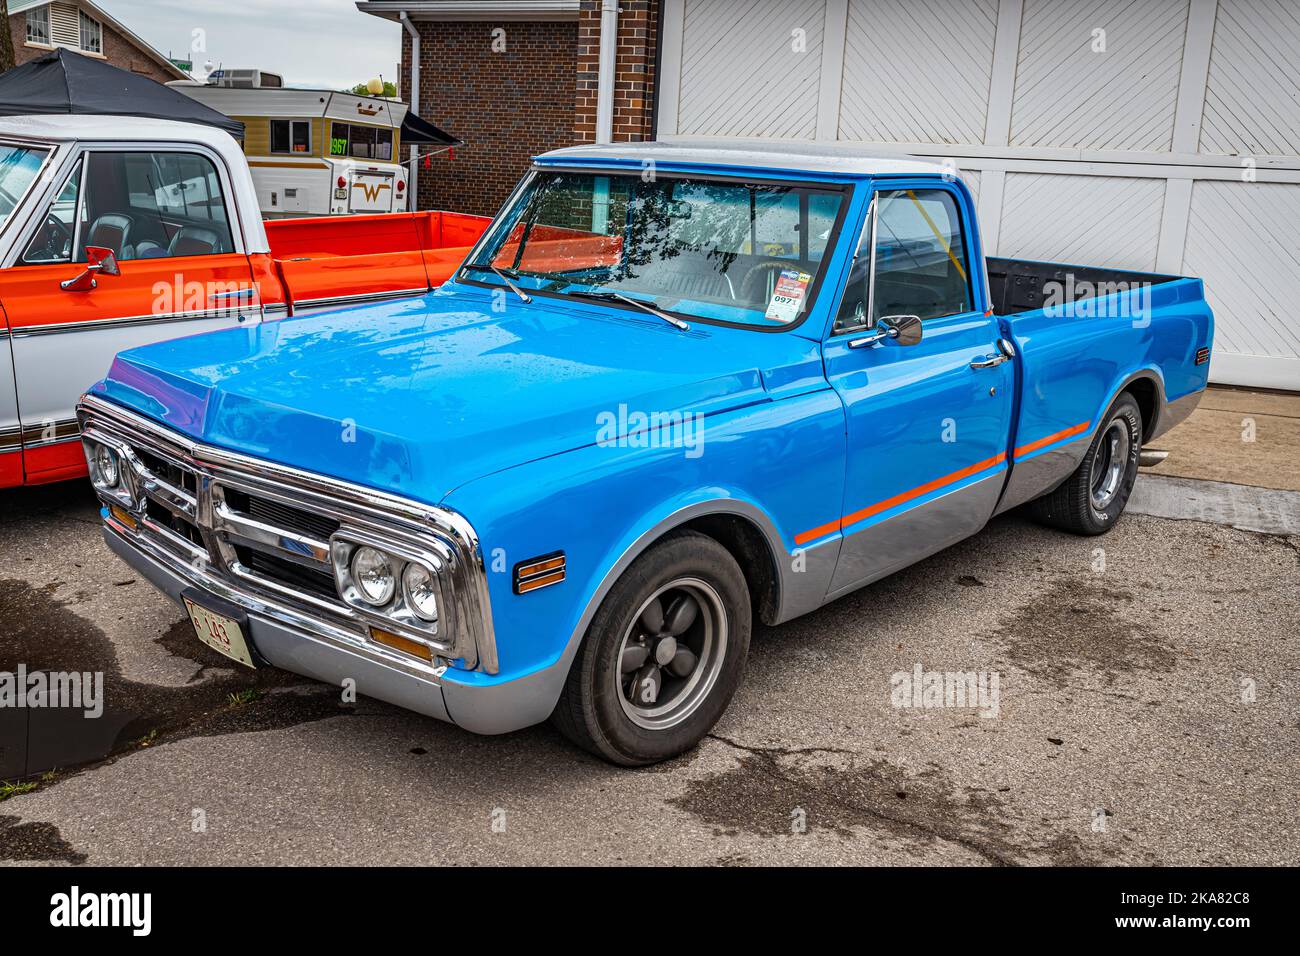 Des Moines, IA - July 01, 2022: High perspective front corner view of a 1972 GMC C10 Pickup Truck at a local car show. Stock Photo